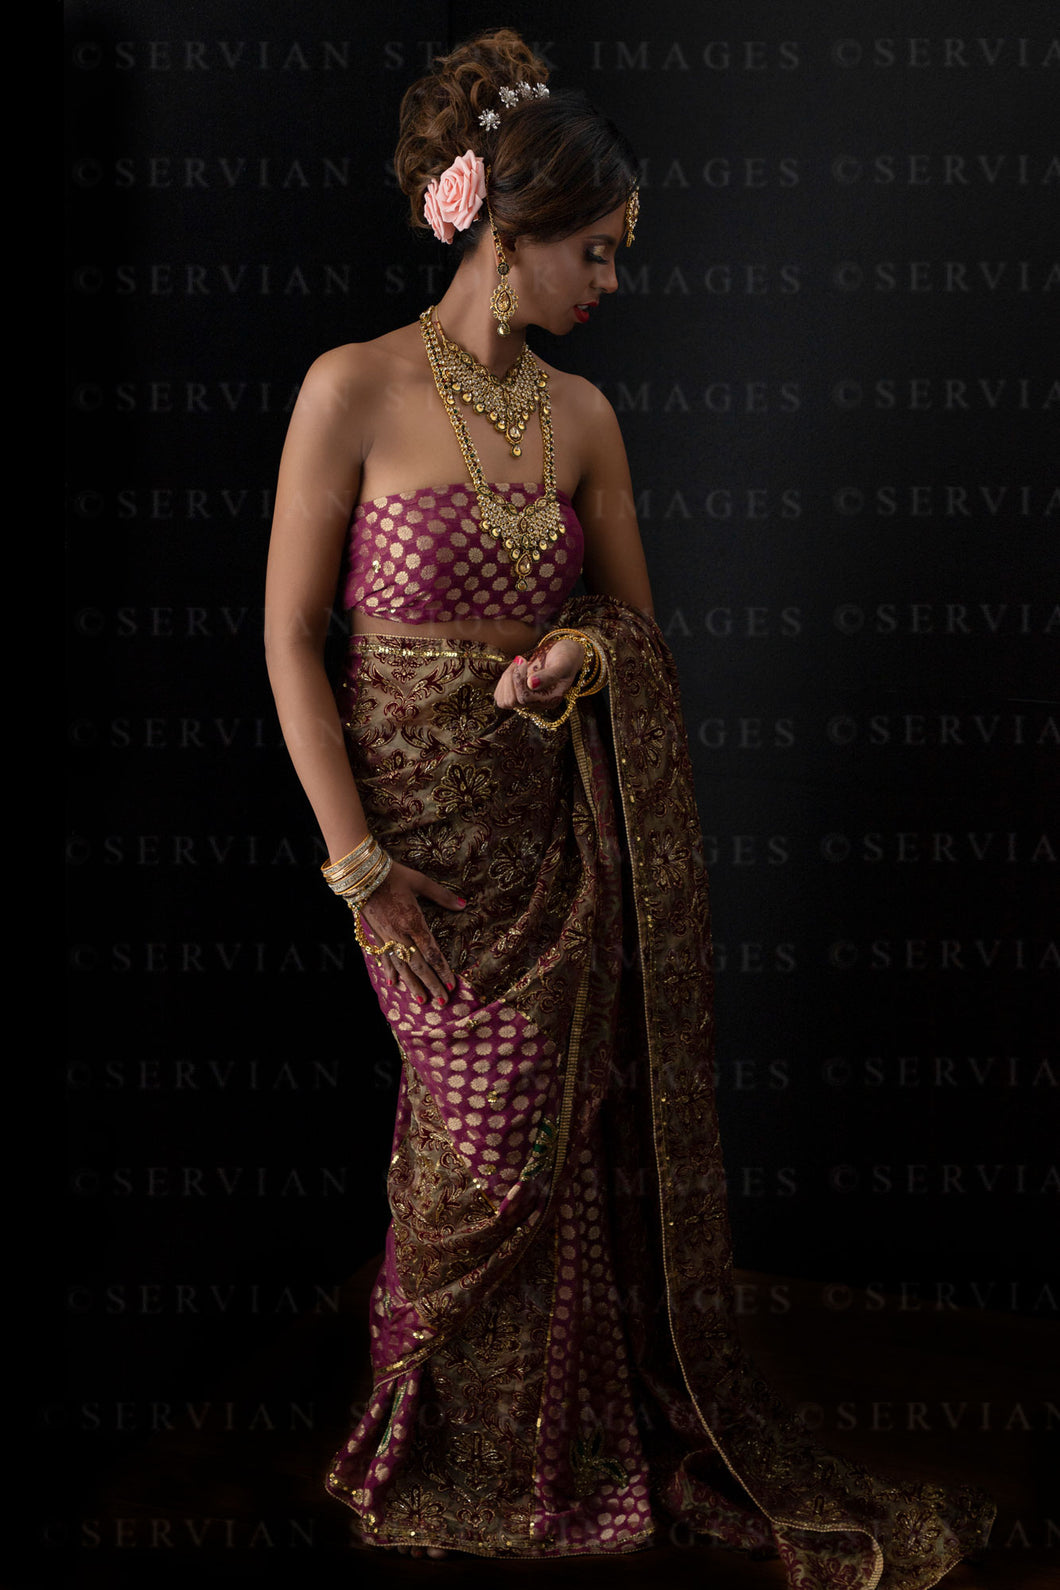 Woman wearing a sari and gold jewellery against a black backdrop (Shelaila 4340)